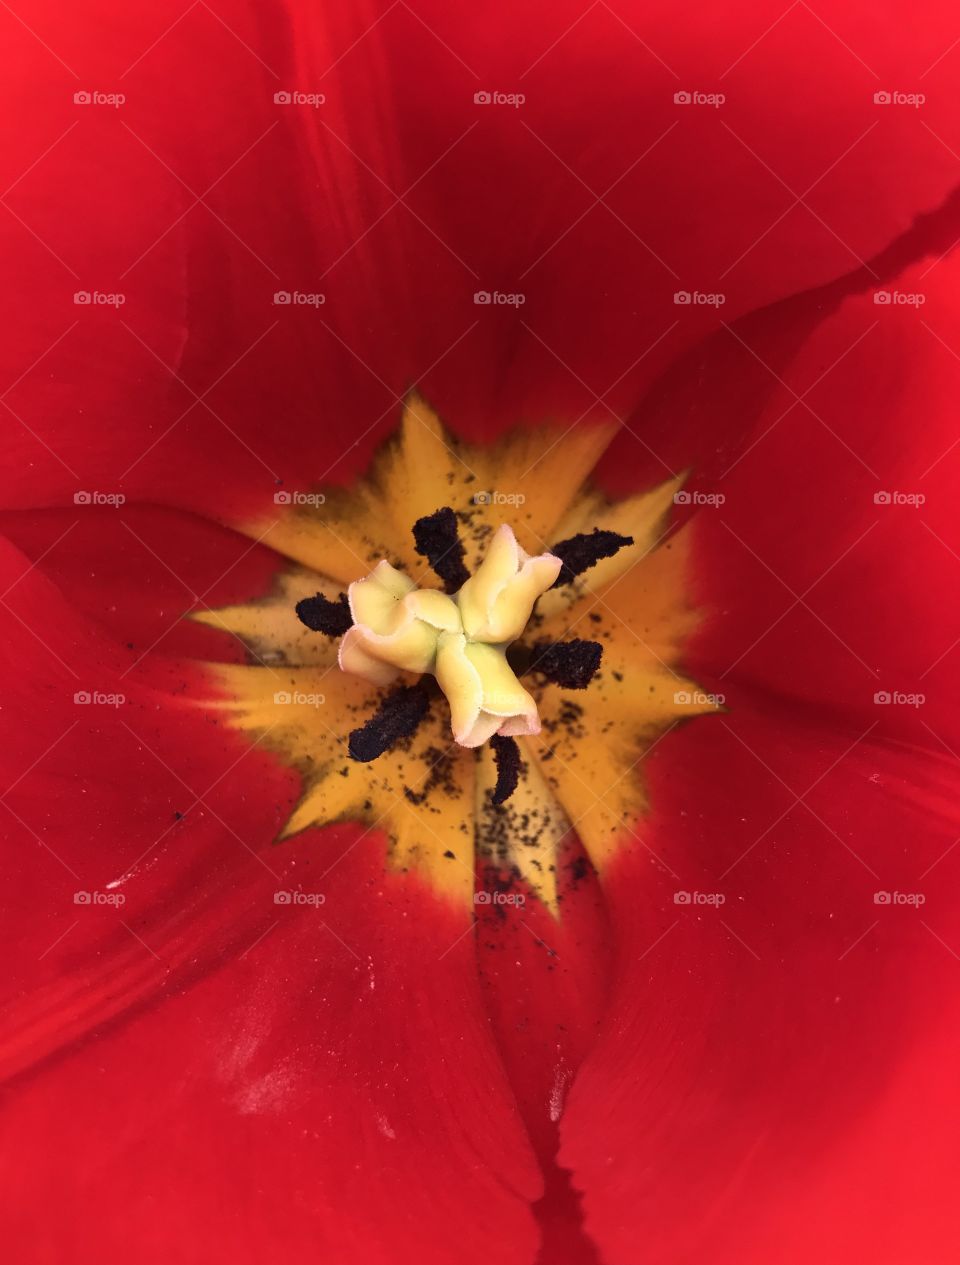 In a Red Tulip